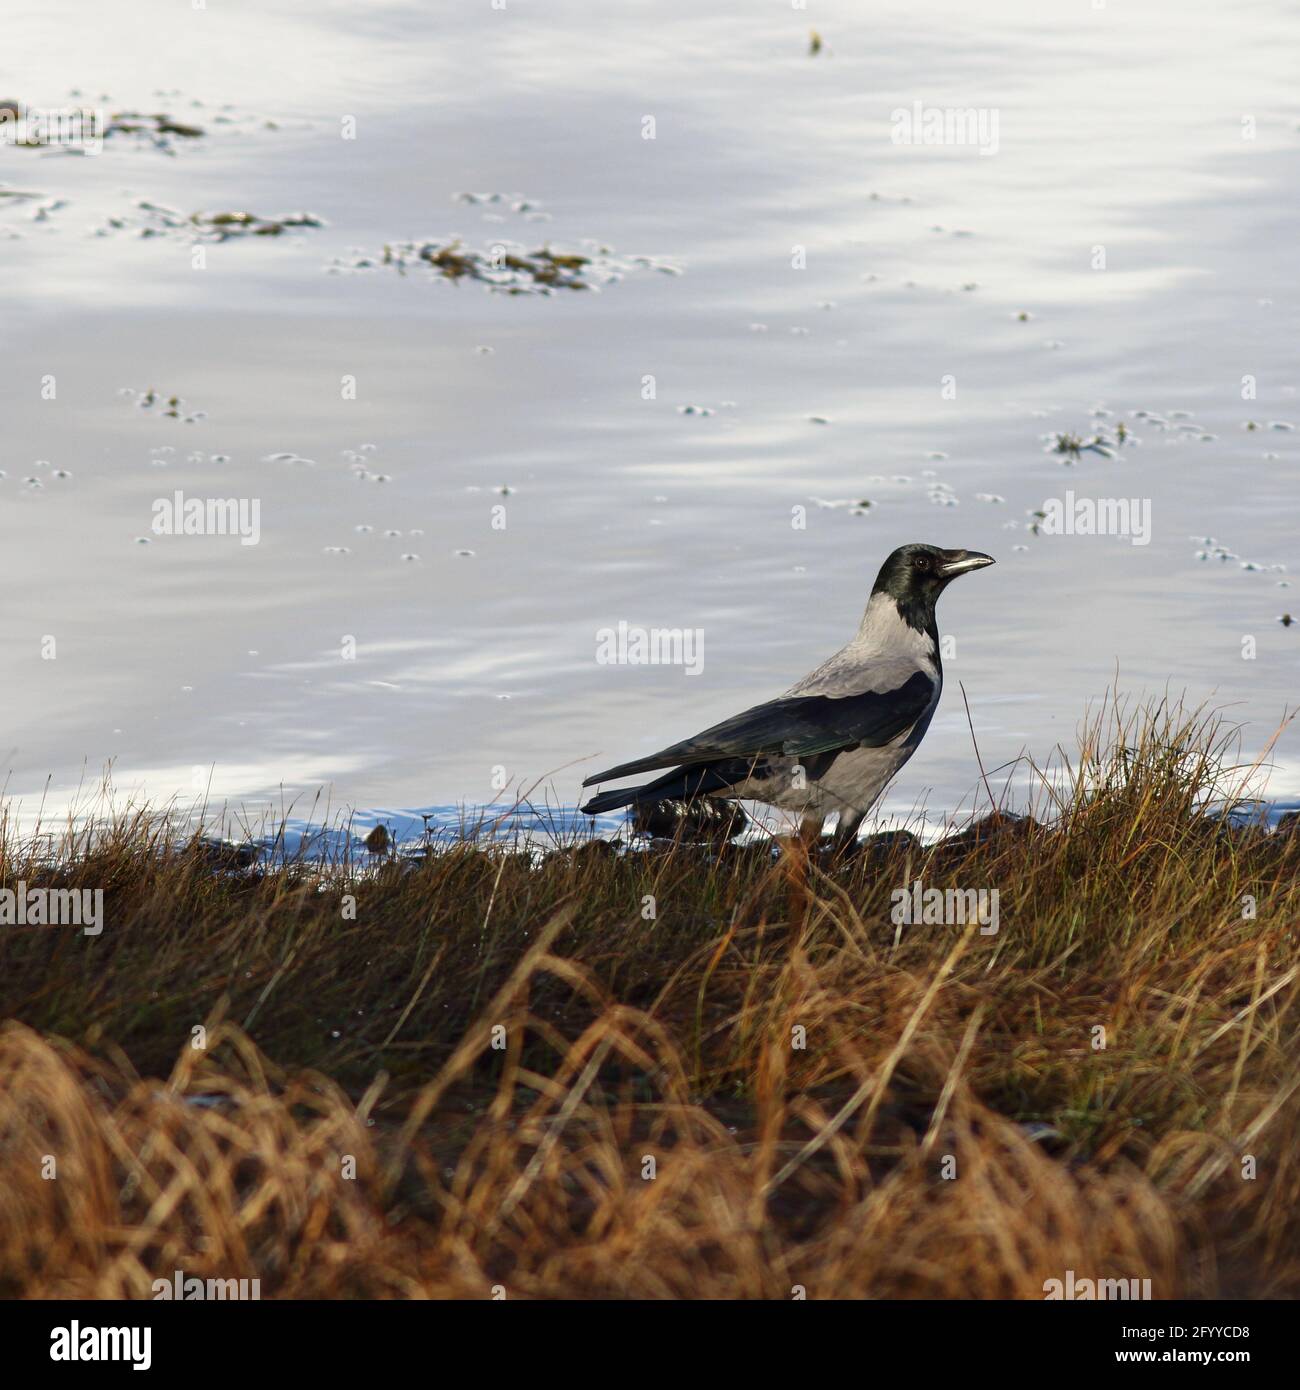 Corvus cornix, Hooded Crow a bird of the remote highlands, standing in rough grass, set with snow behind, so making the image idea for text around it. Stock Photo